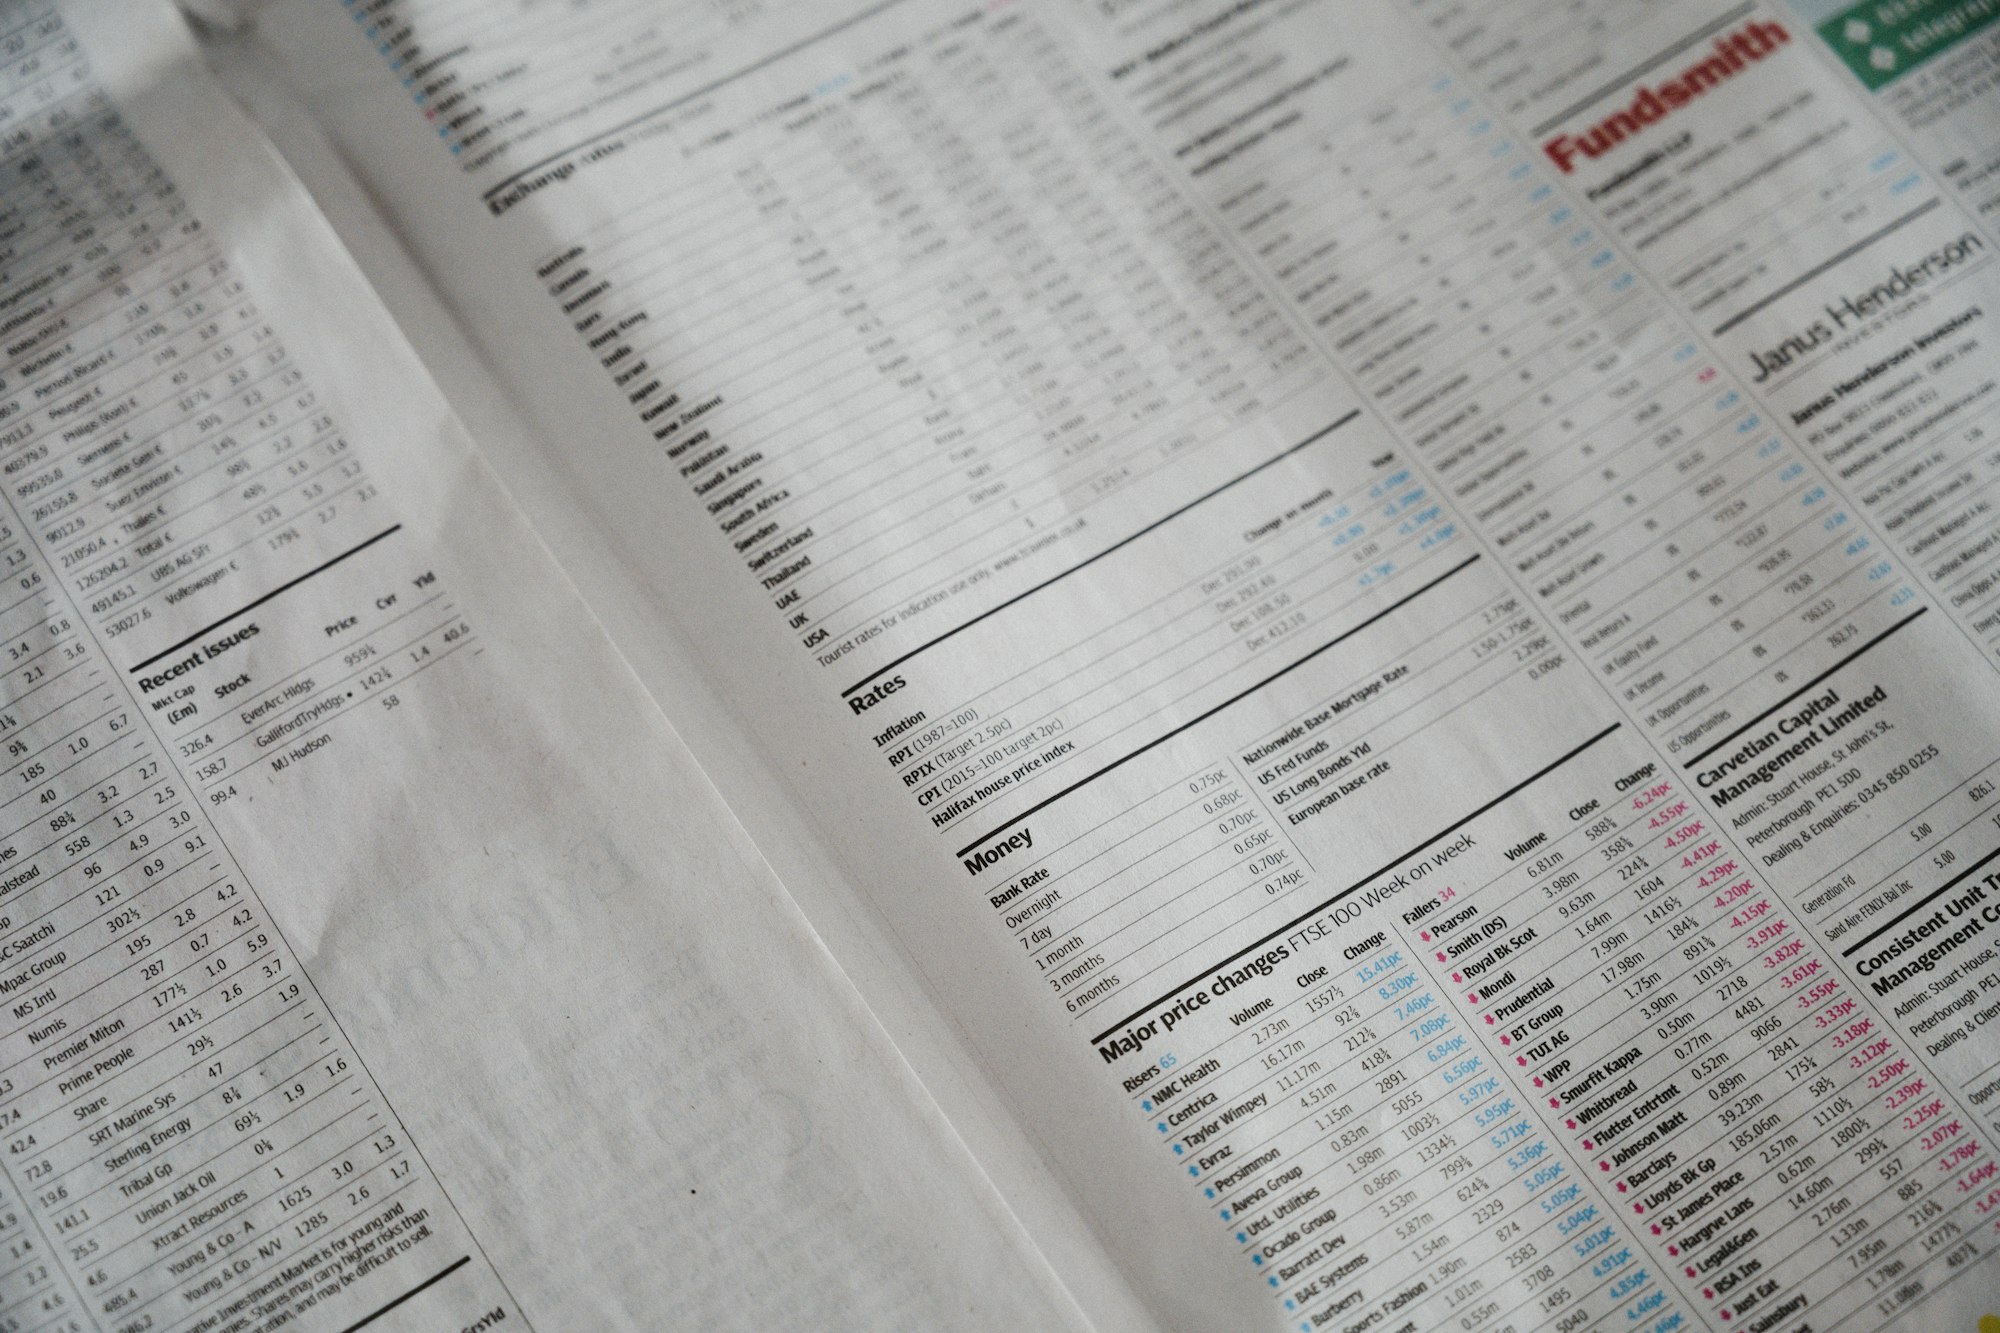 Finance section of a newspaper